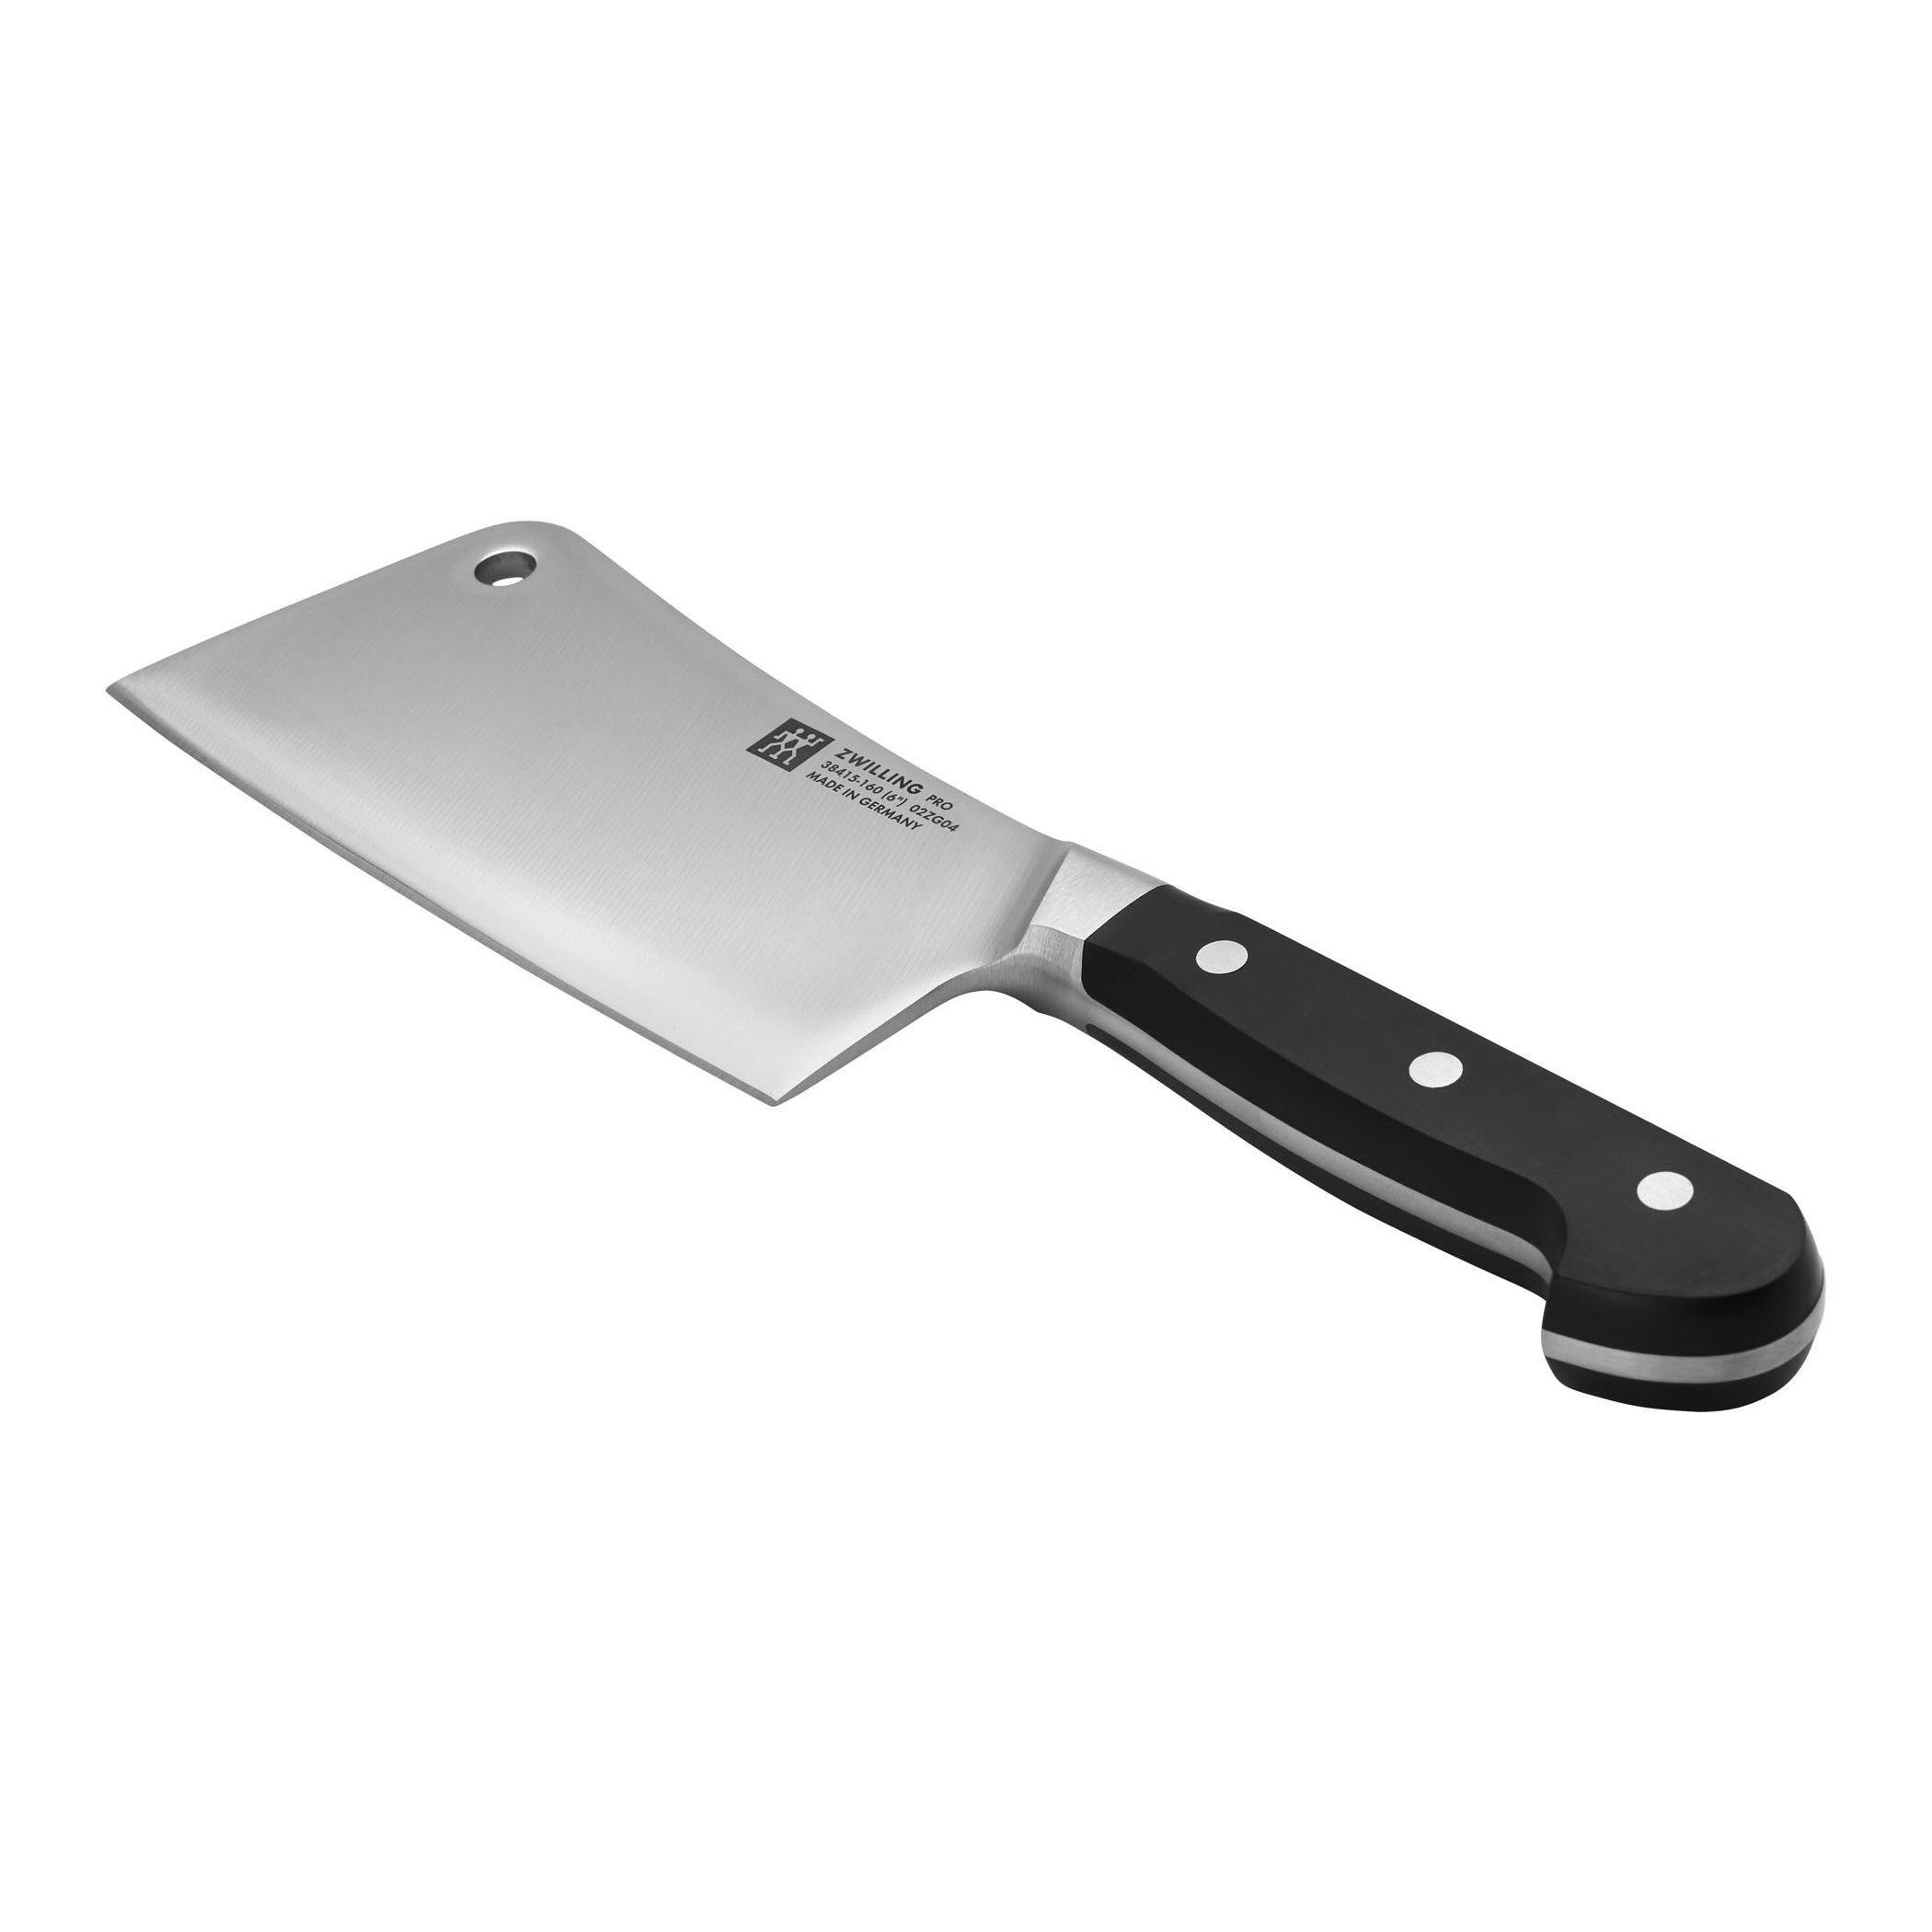 Zwilling Pro 6" Meat Cleaver